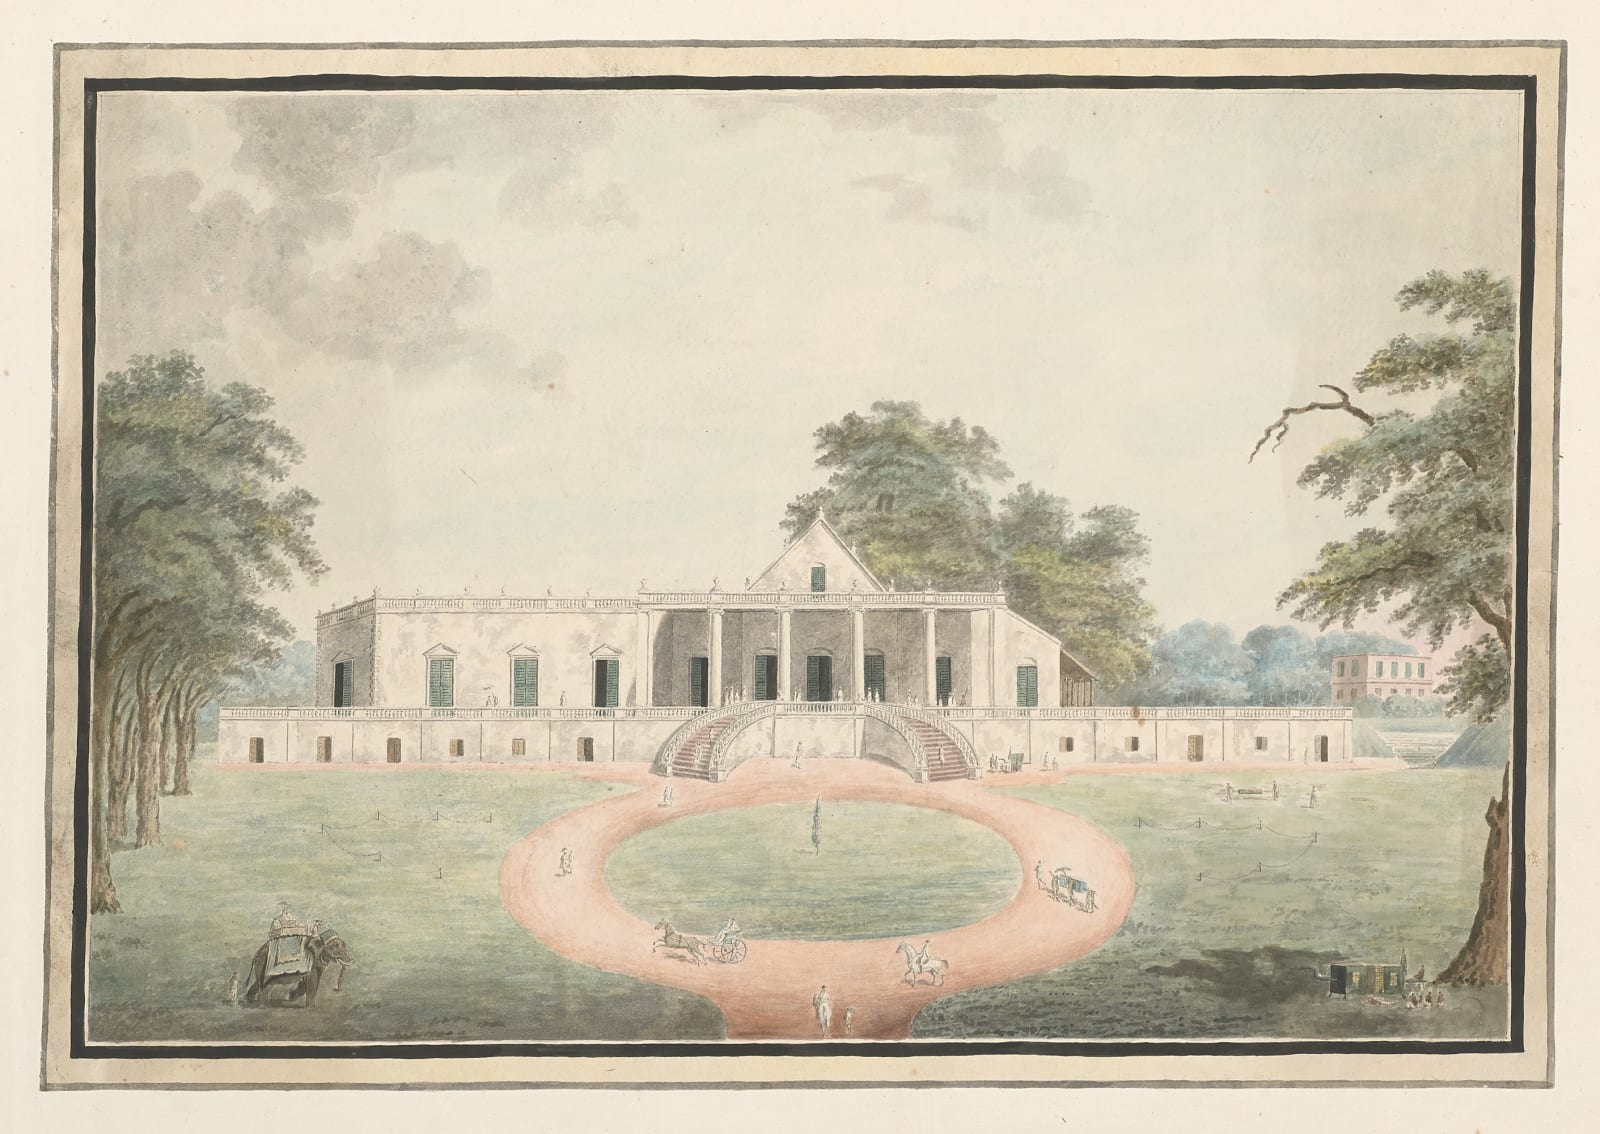 View of a single-storey house with portico over a raised platform with divided staircase; circular driveway and garden showing family and friends at their leisure, Murshidabad, 1795–1810